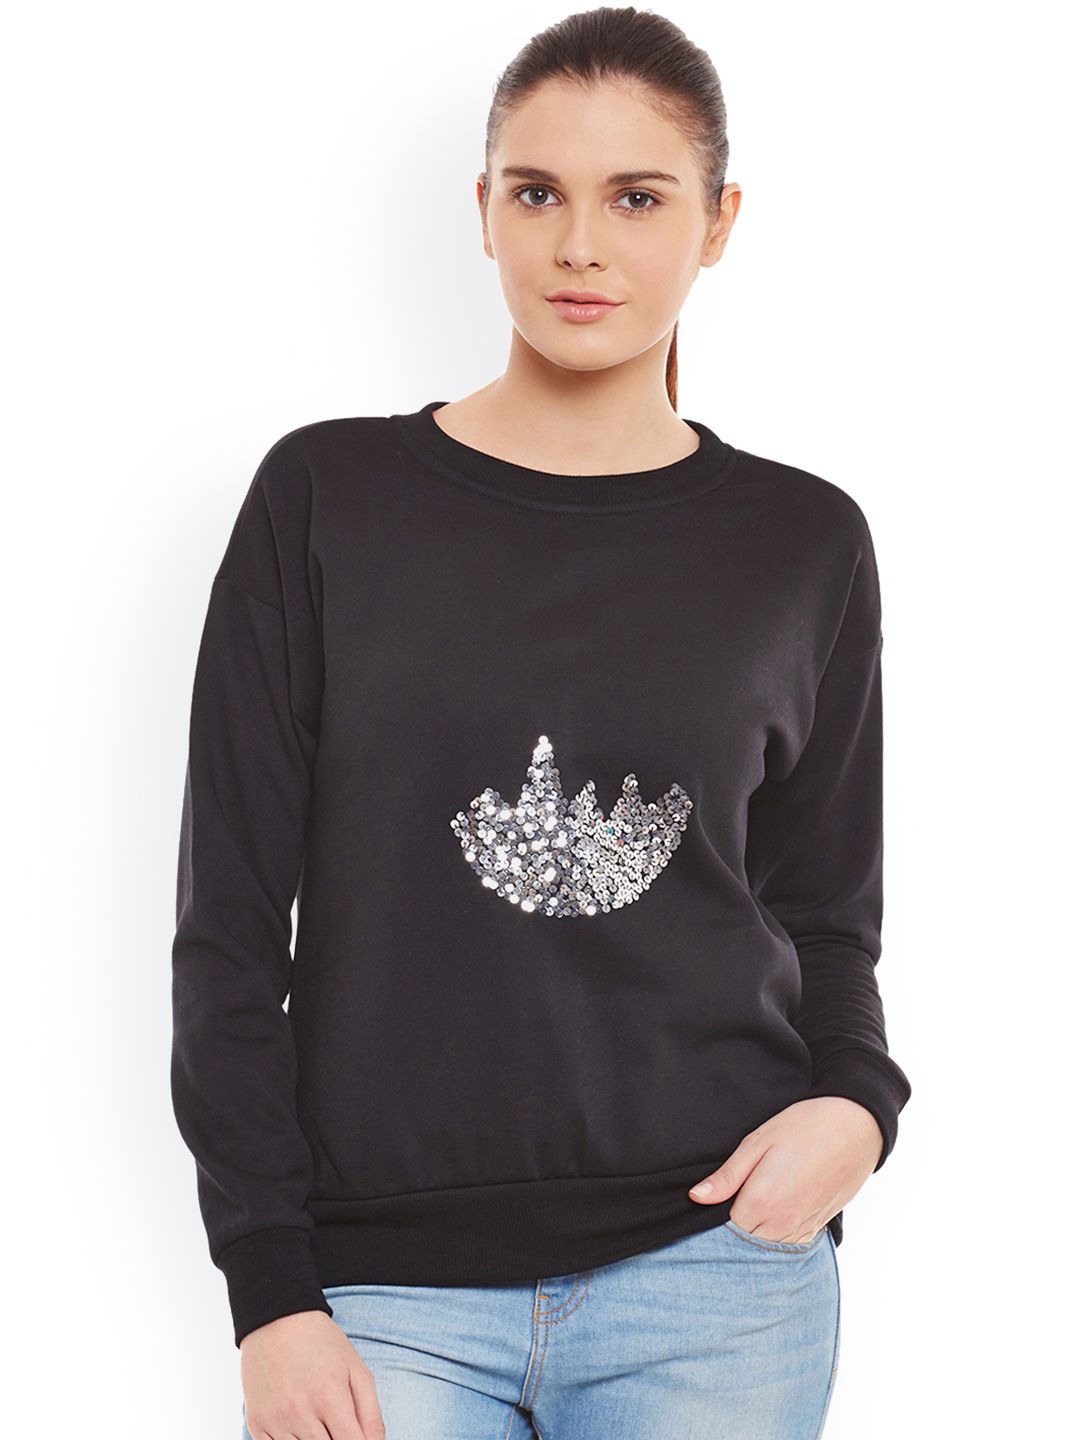 Belle Fille Black Sweatshirt with Sequinned Detail Price in India